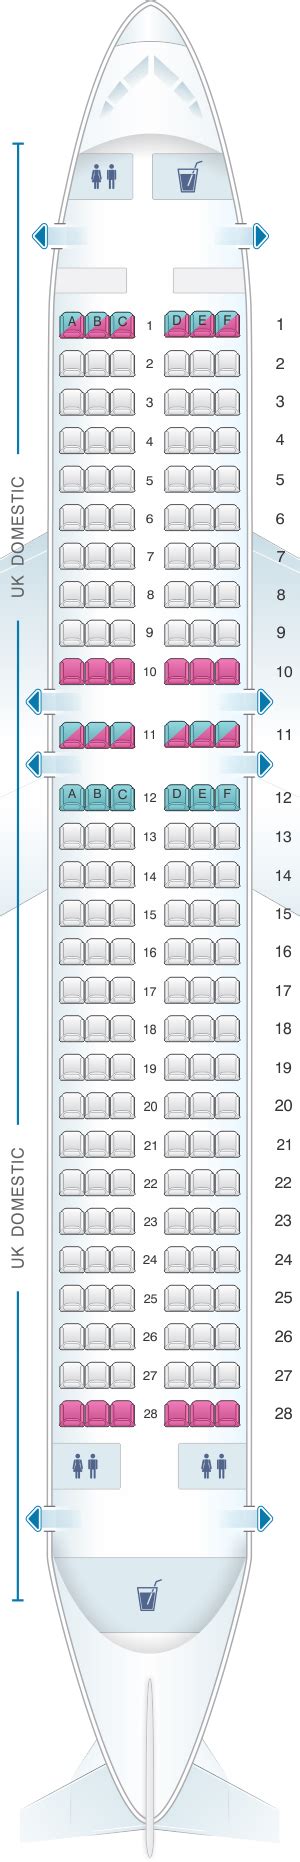 Seat Map British Airways Airbus A320 Domestic Layout C33